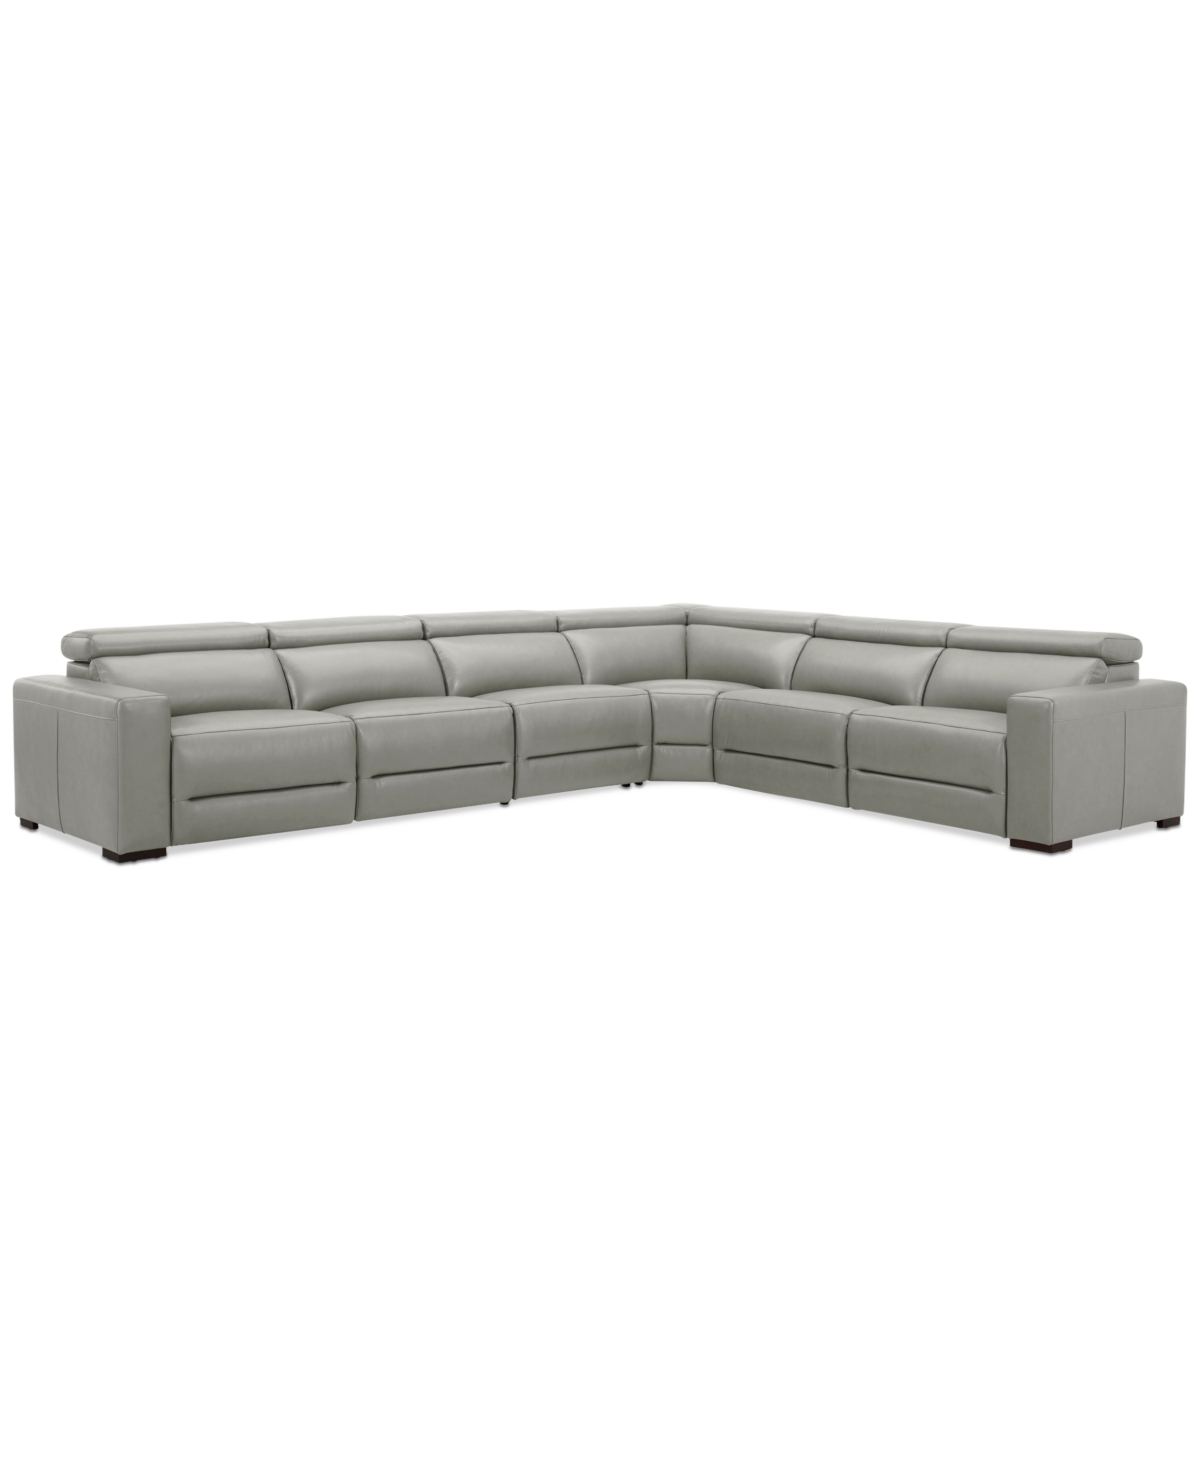 Macy's Nevio 157" 6-pc. Leather Sectional With 2 Power Recliners And Headrests, Created For  In Light Grey